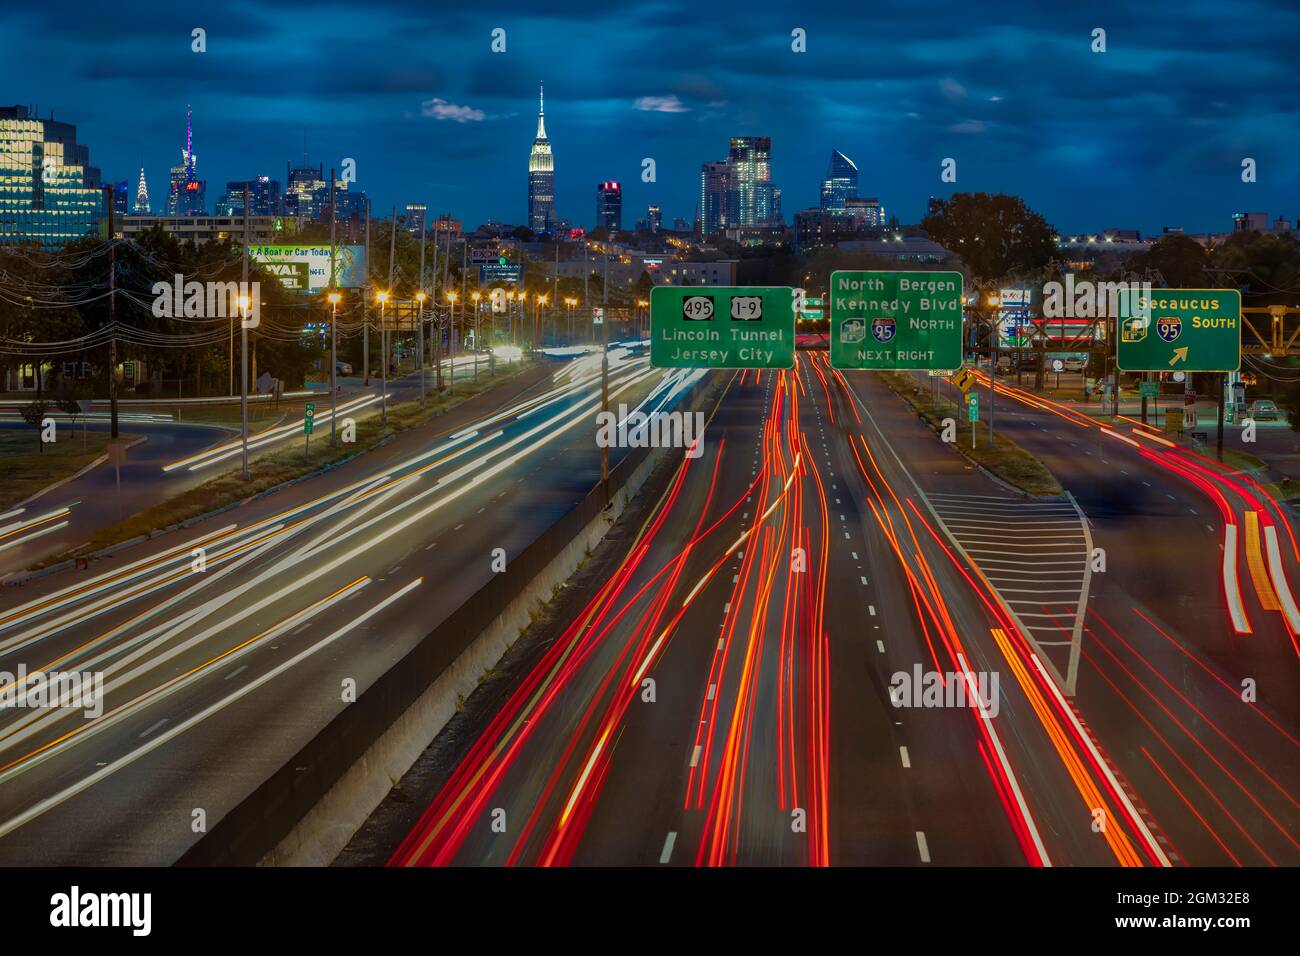 Path To And From NYC - Vehicular light trails from route 3 in New Jersey lead to a view of the New York City skyline.   Showcased is the iconic landma Stock Photo